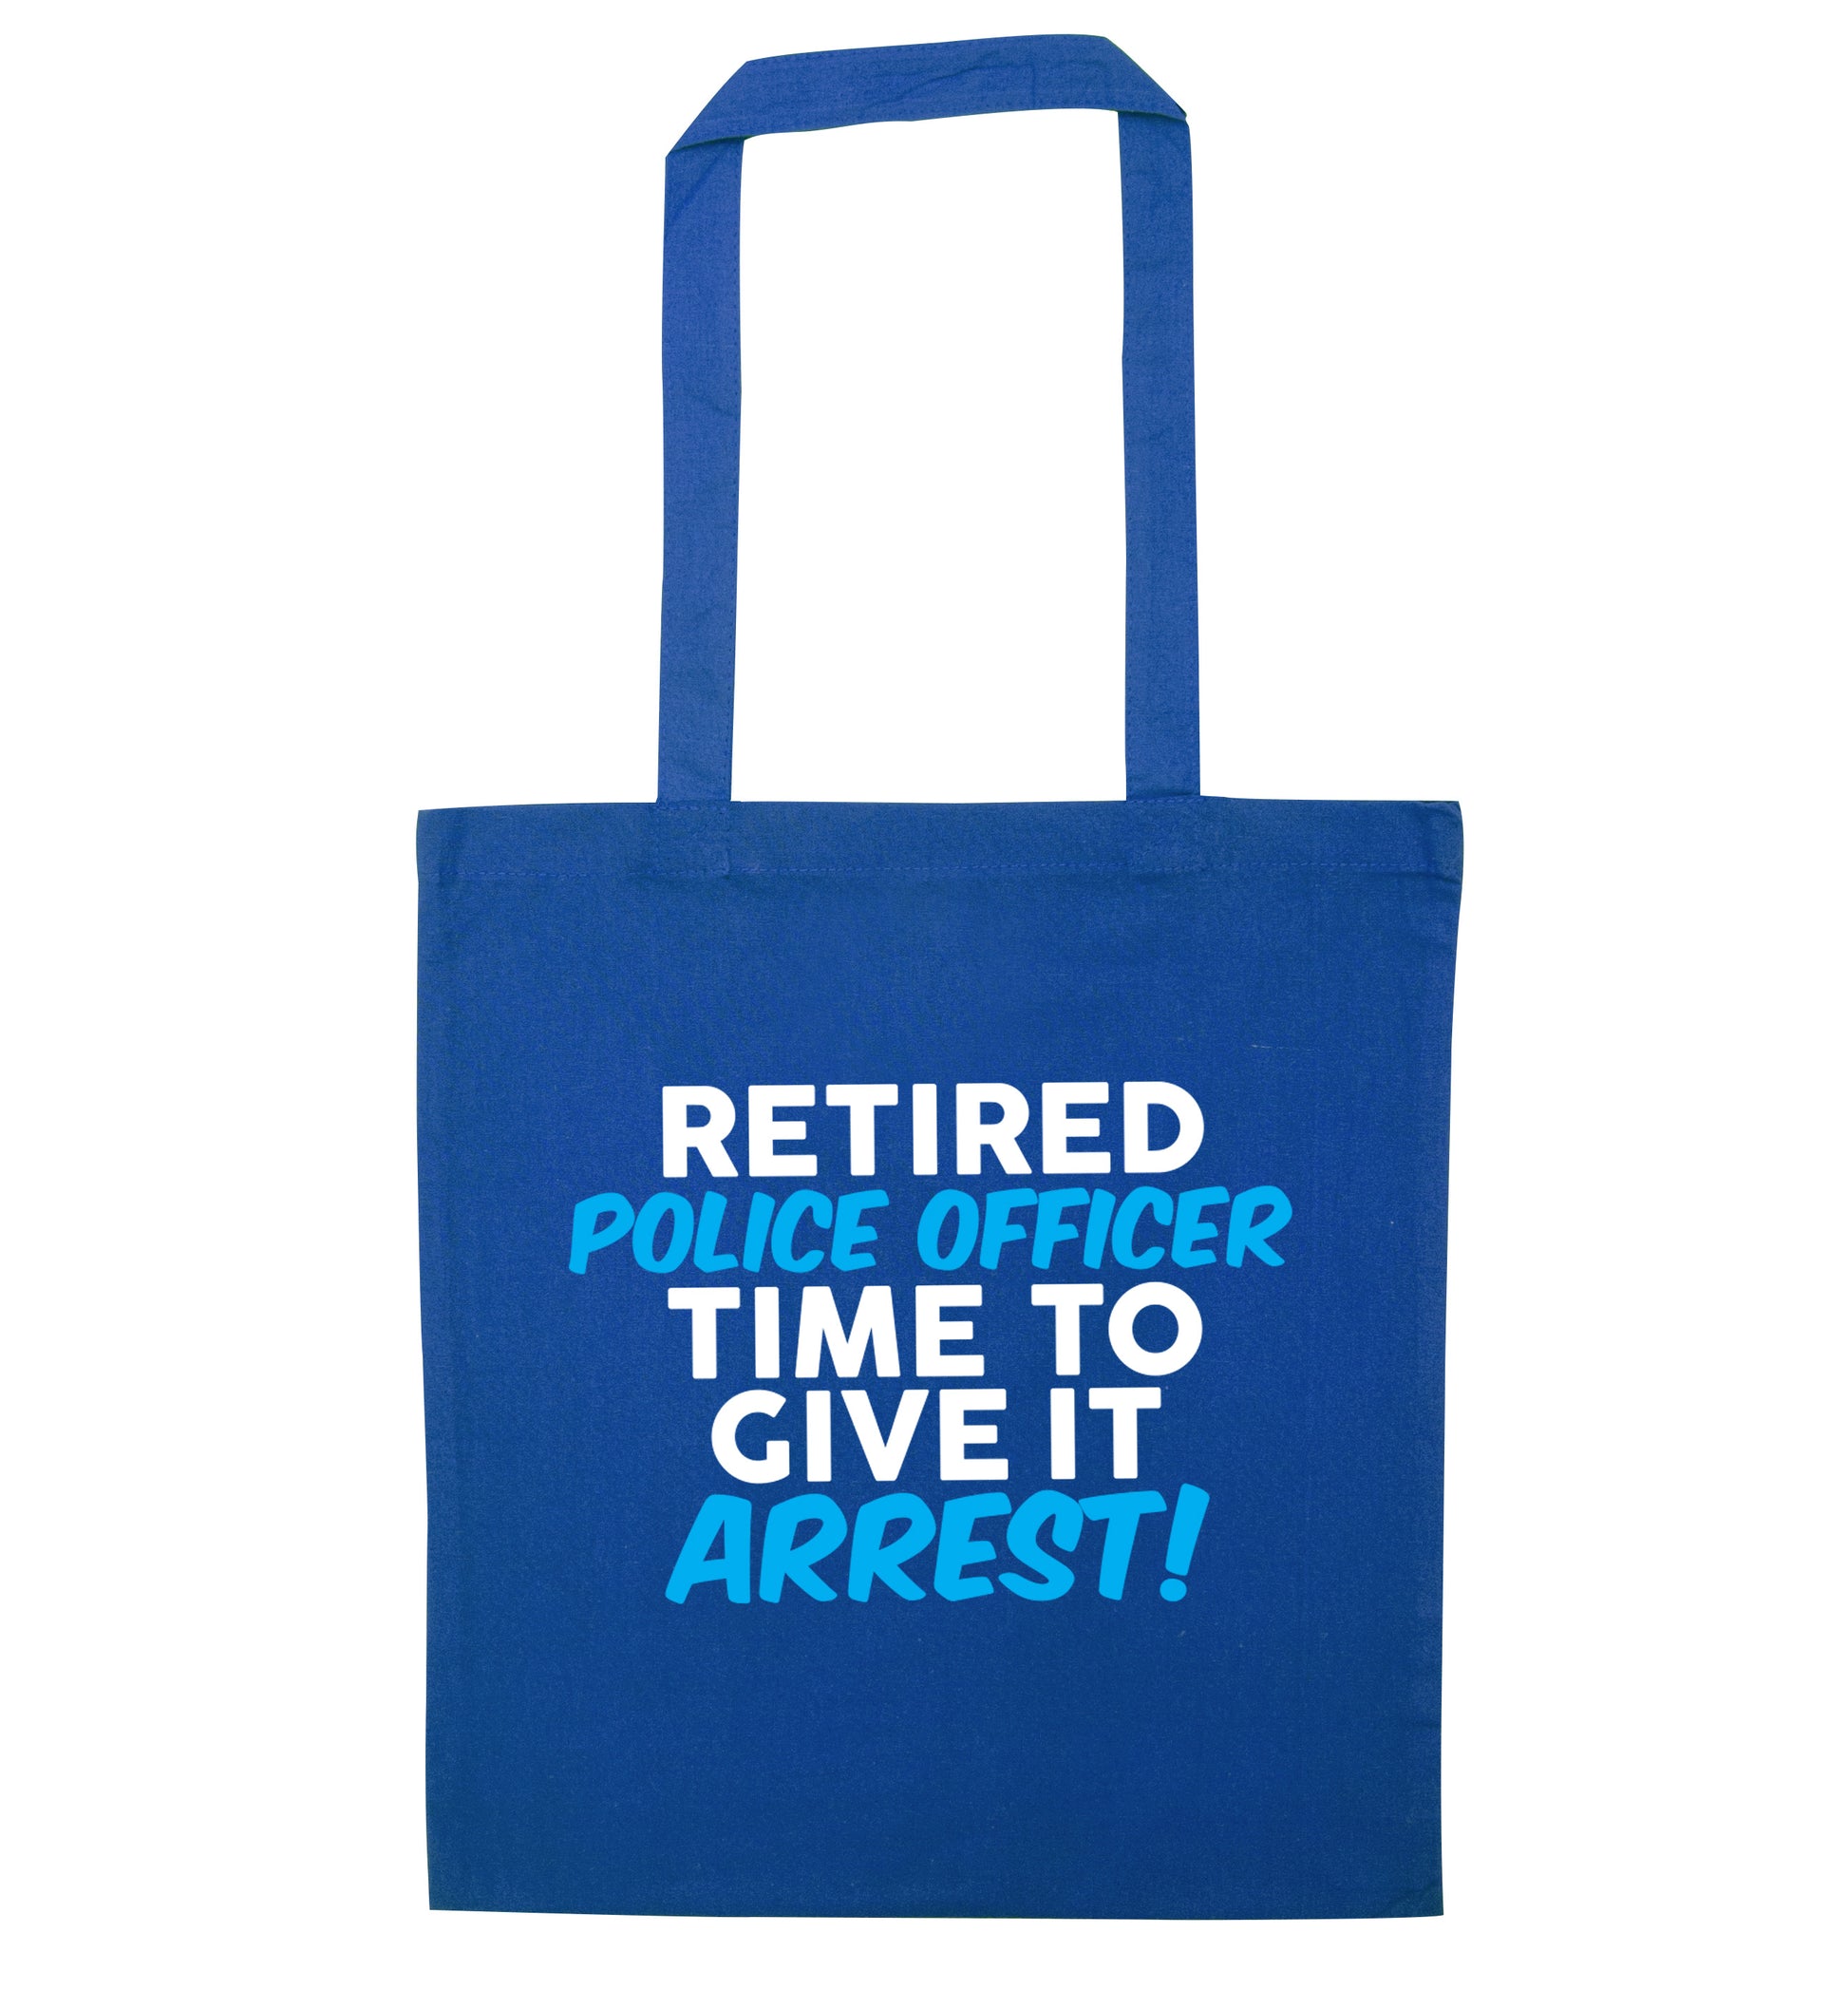 Retired police officer time to give it arrest blue tote bag